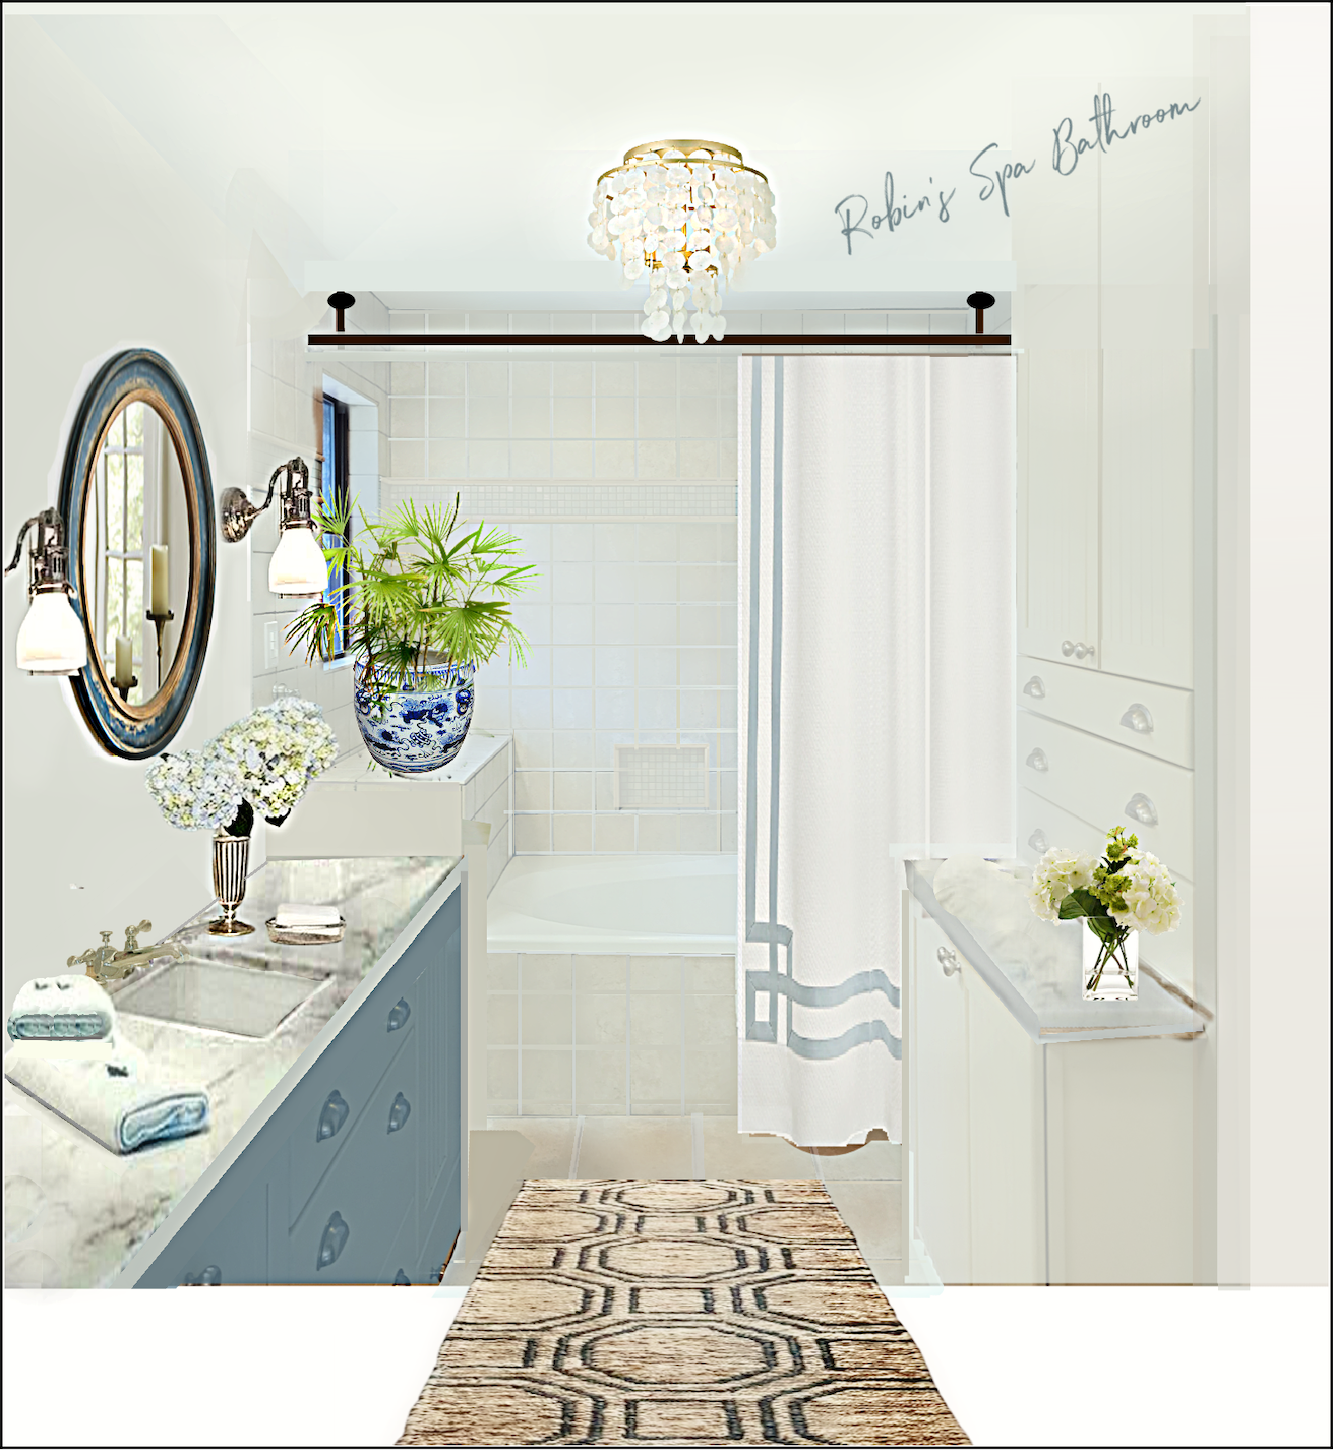  Bathroom - reglazed tile - painted cabinets - new marble counters - shower curtain - capiz chandelier